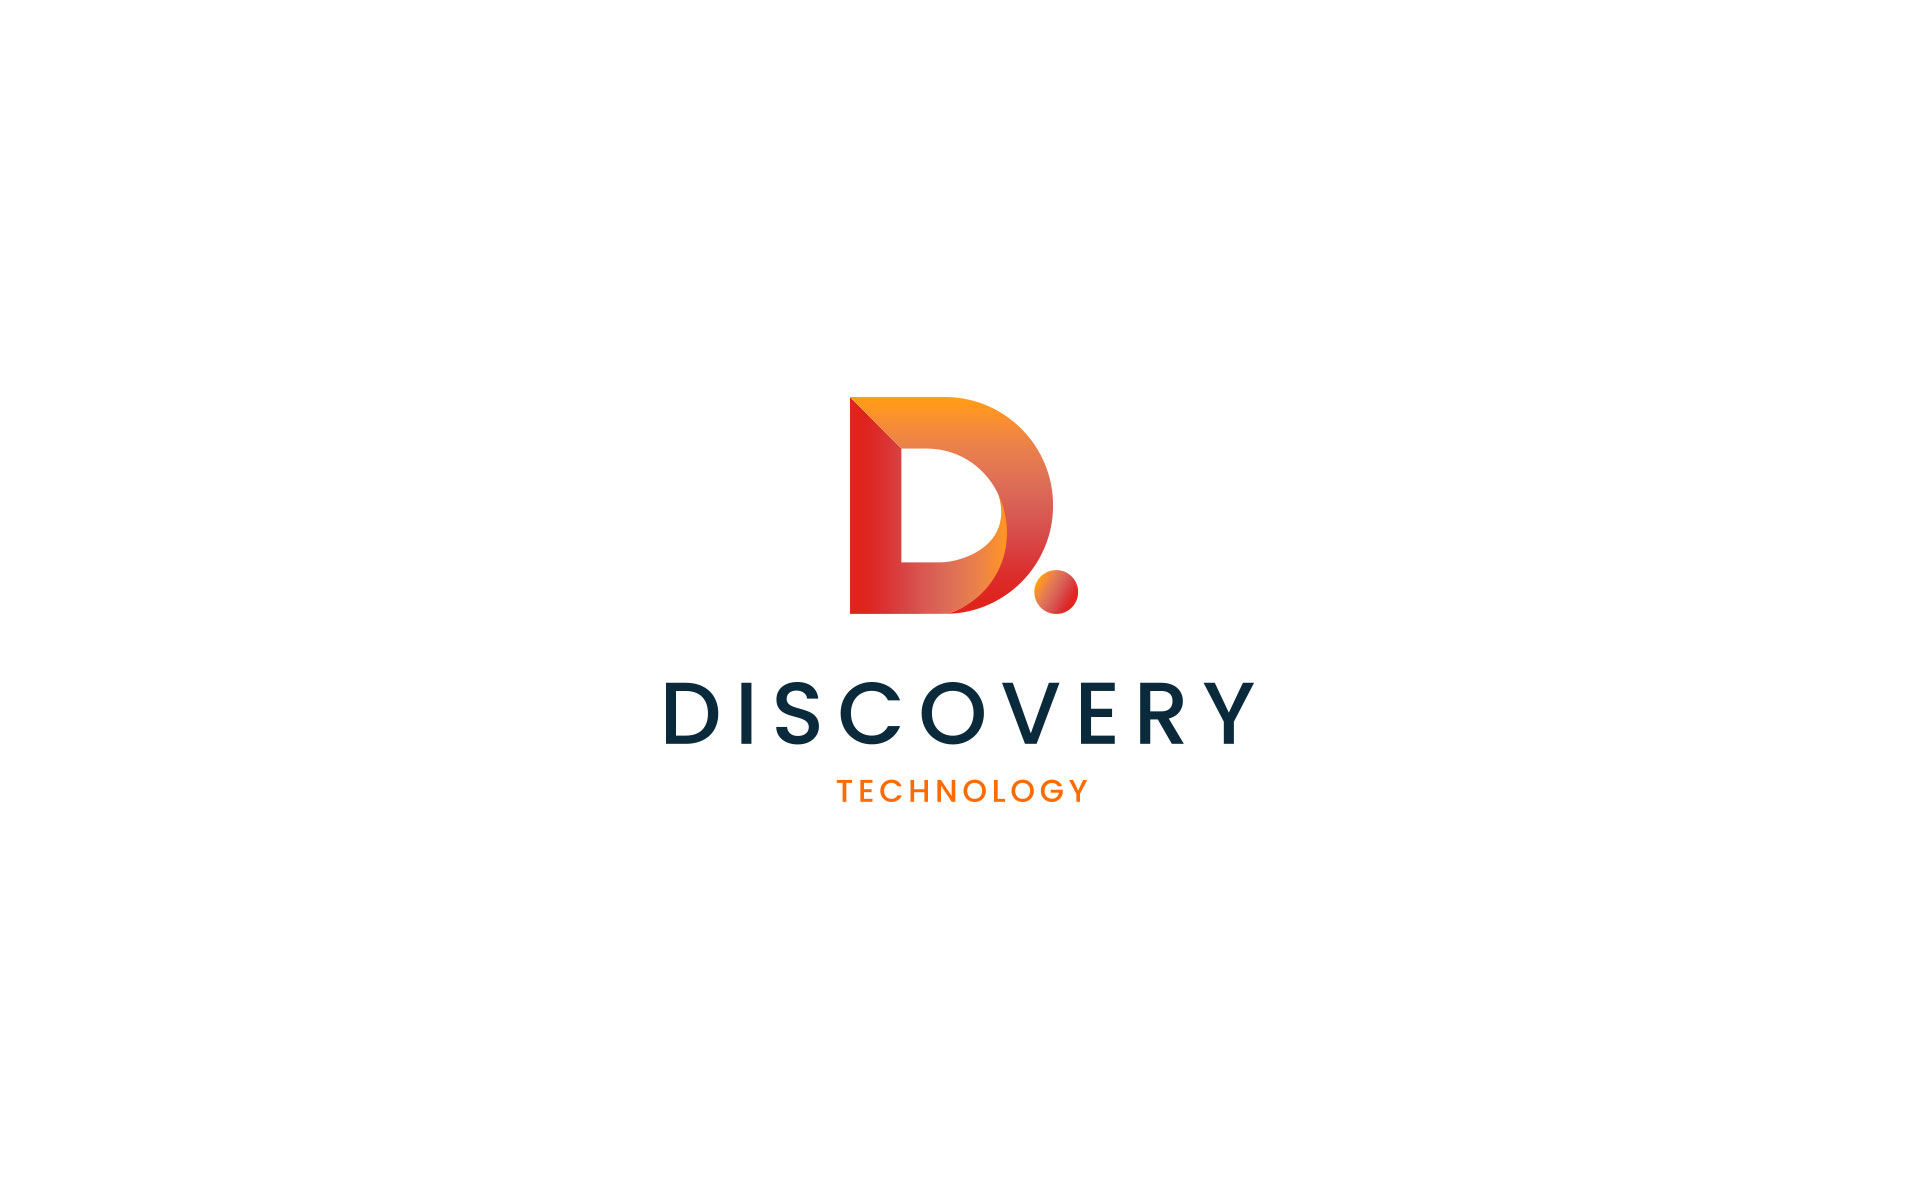 Discovery Technology logo, branding, marketing, publications & website design & build by Amy at Yellow Sunday